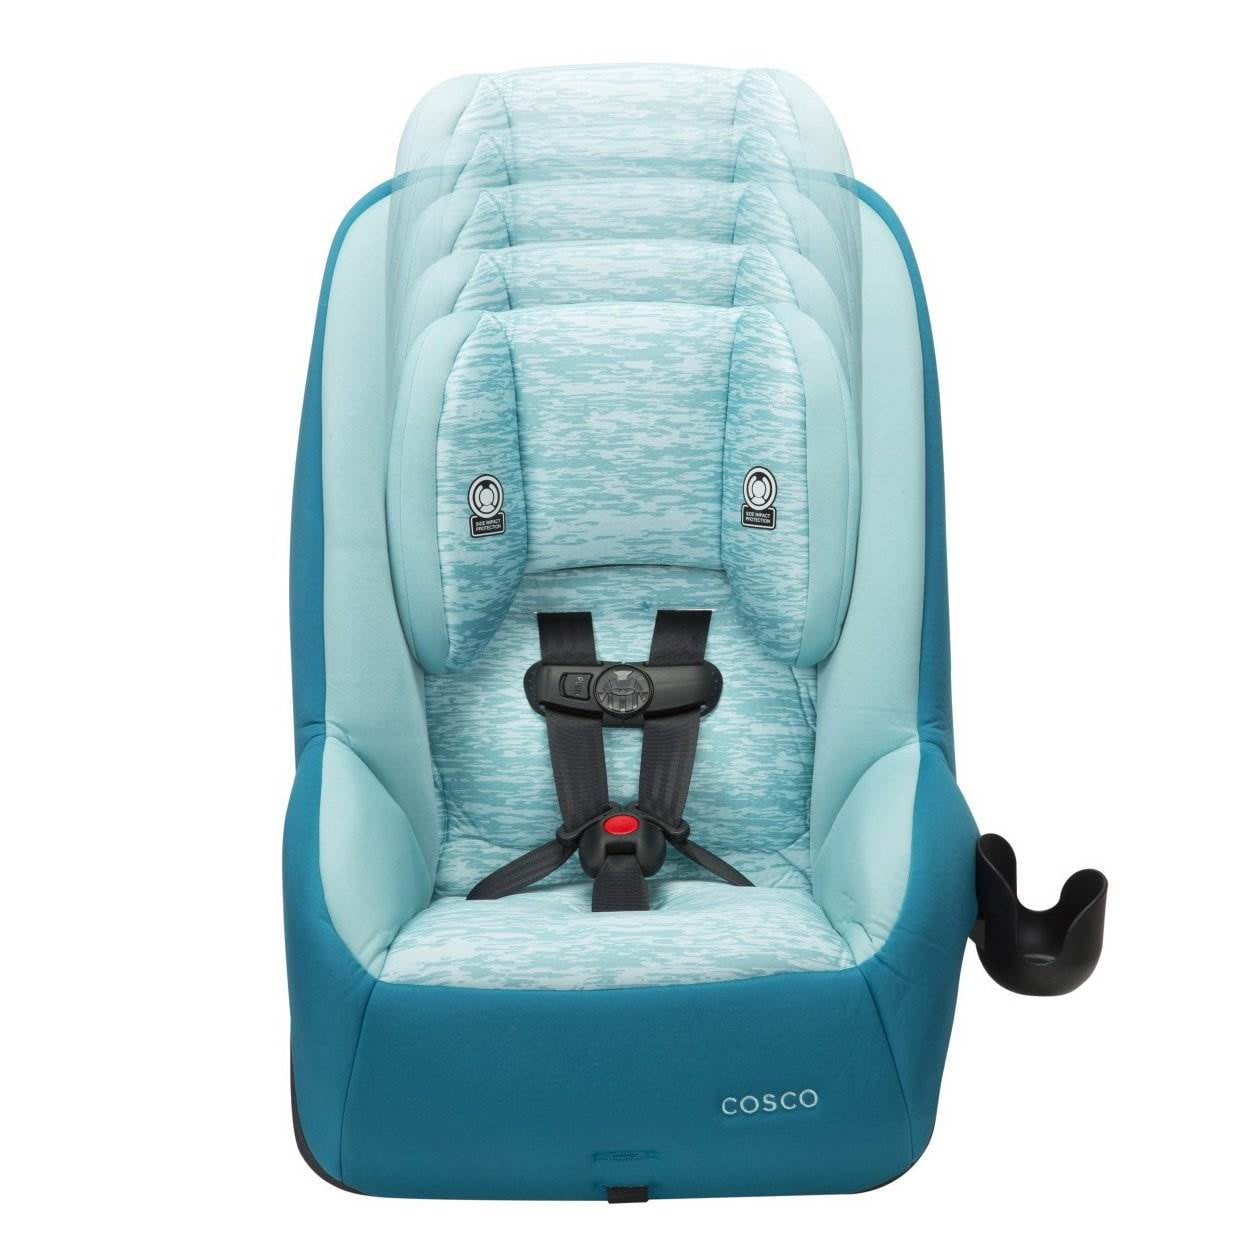 mighty fit 65 car seat